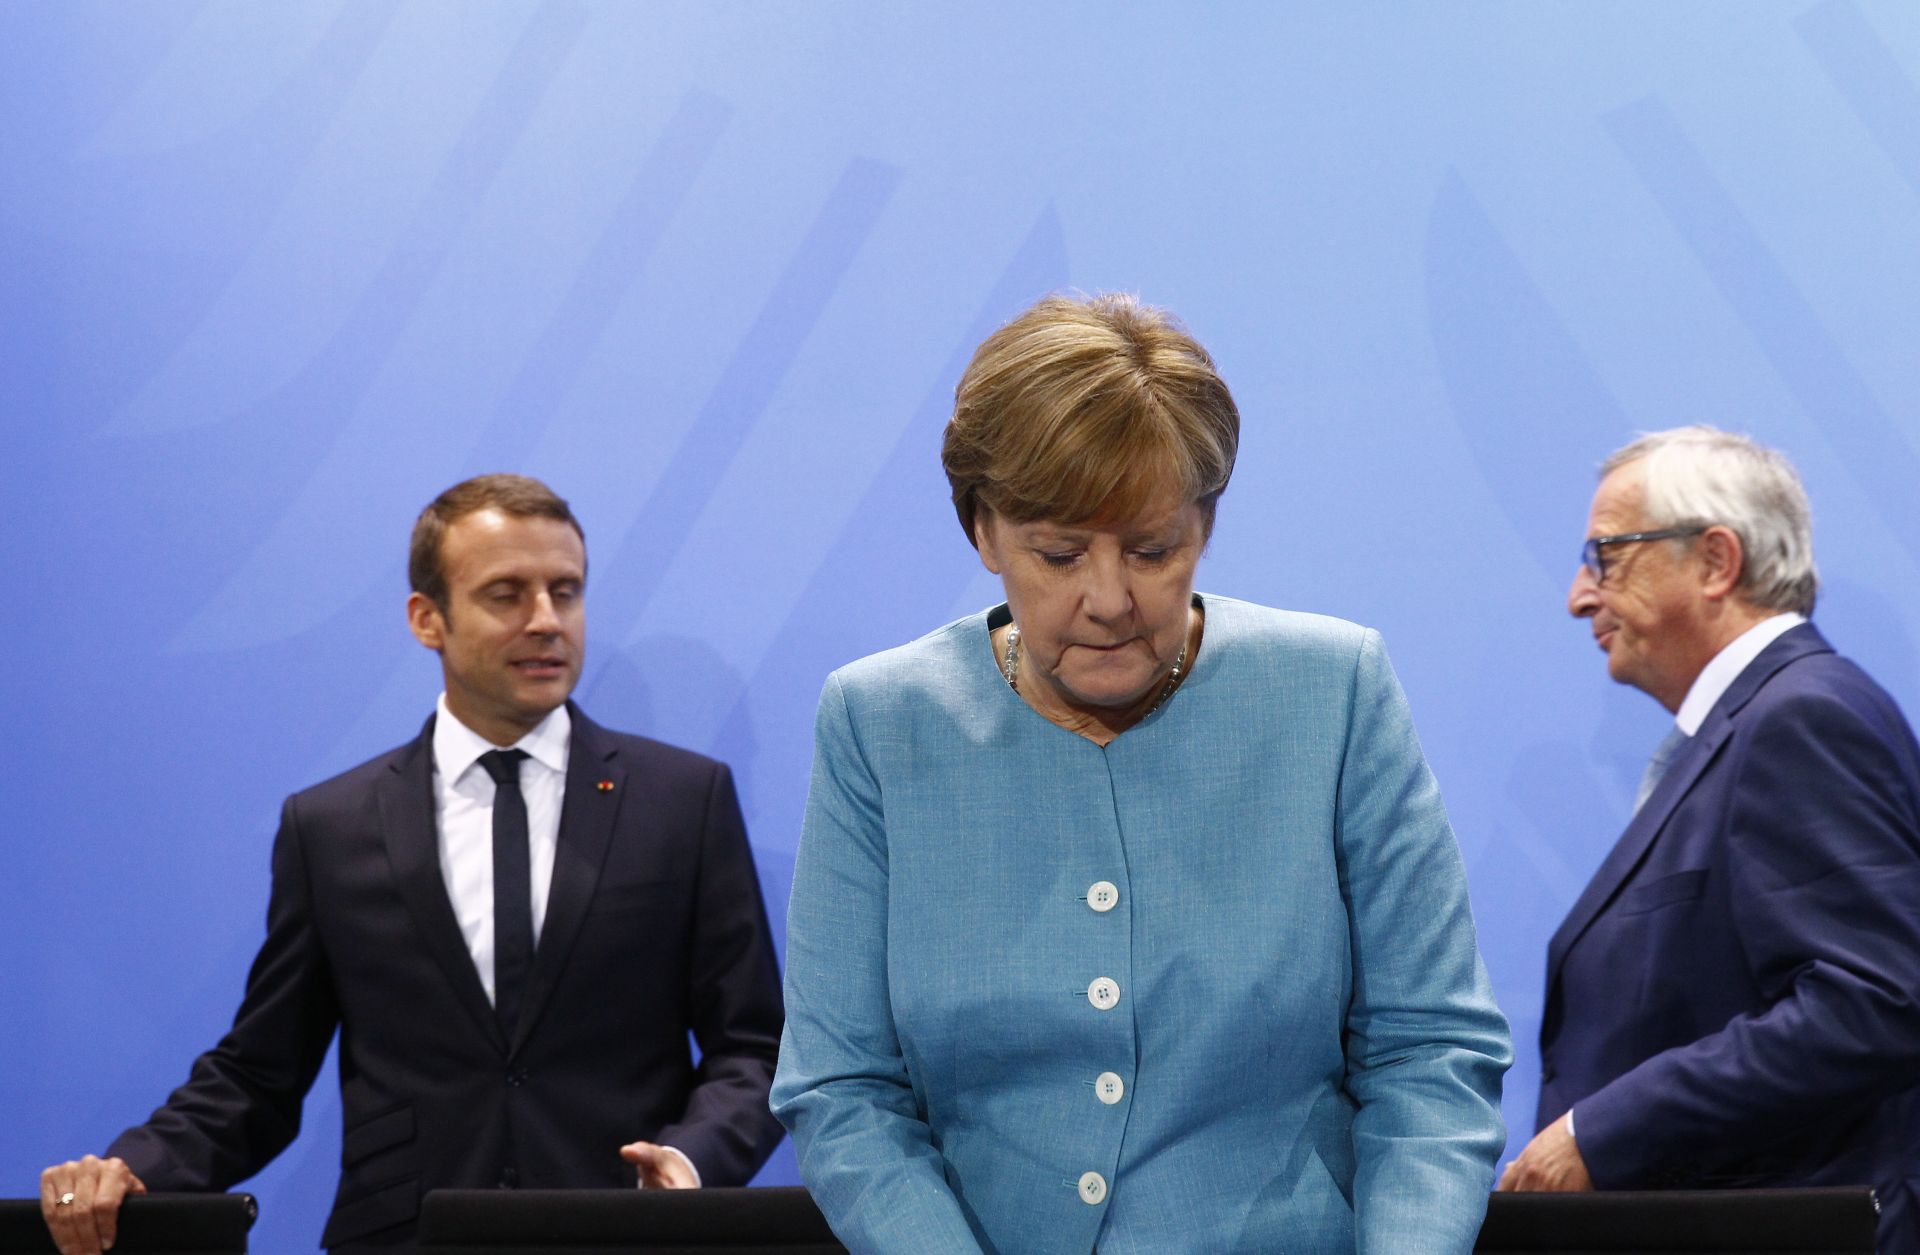 German Chancellor Angela Merkel, French President Emmanuel Macron and European Commission President Jean-Claude Juncker gather for a press conference after a June 29 meeting of EU leaders in Berlin.